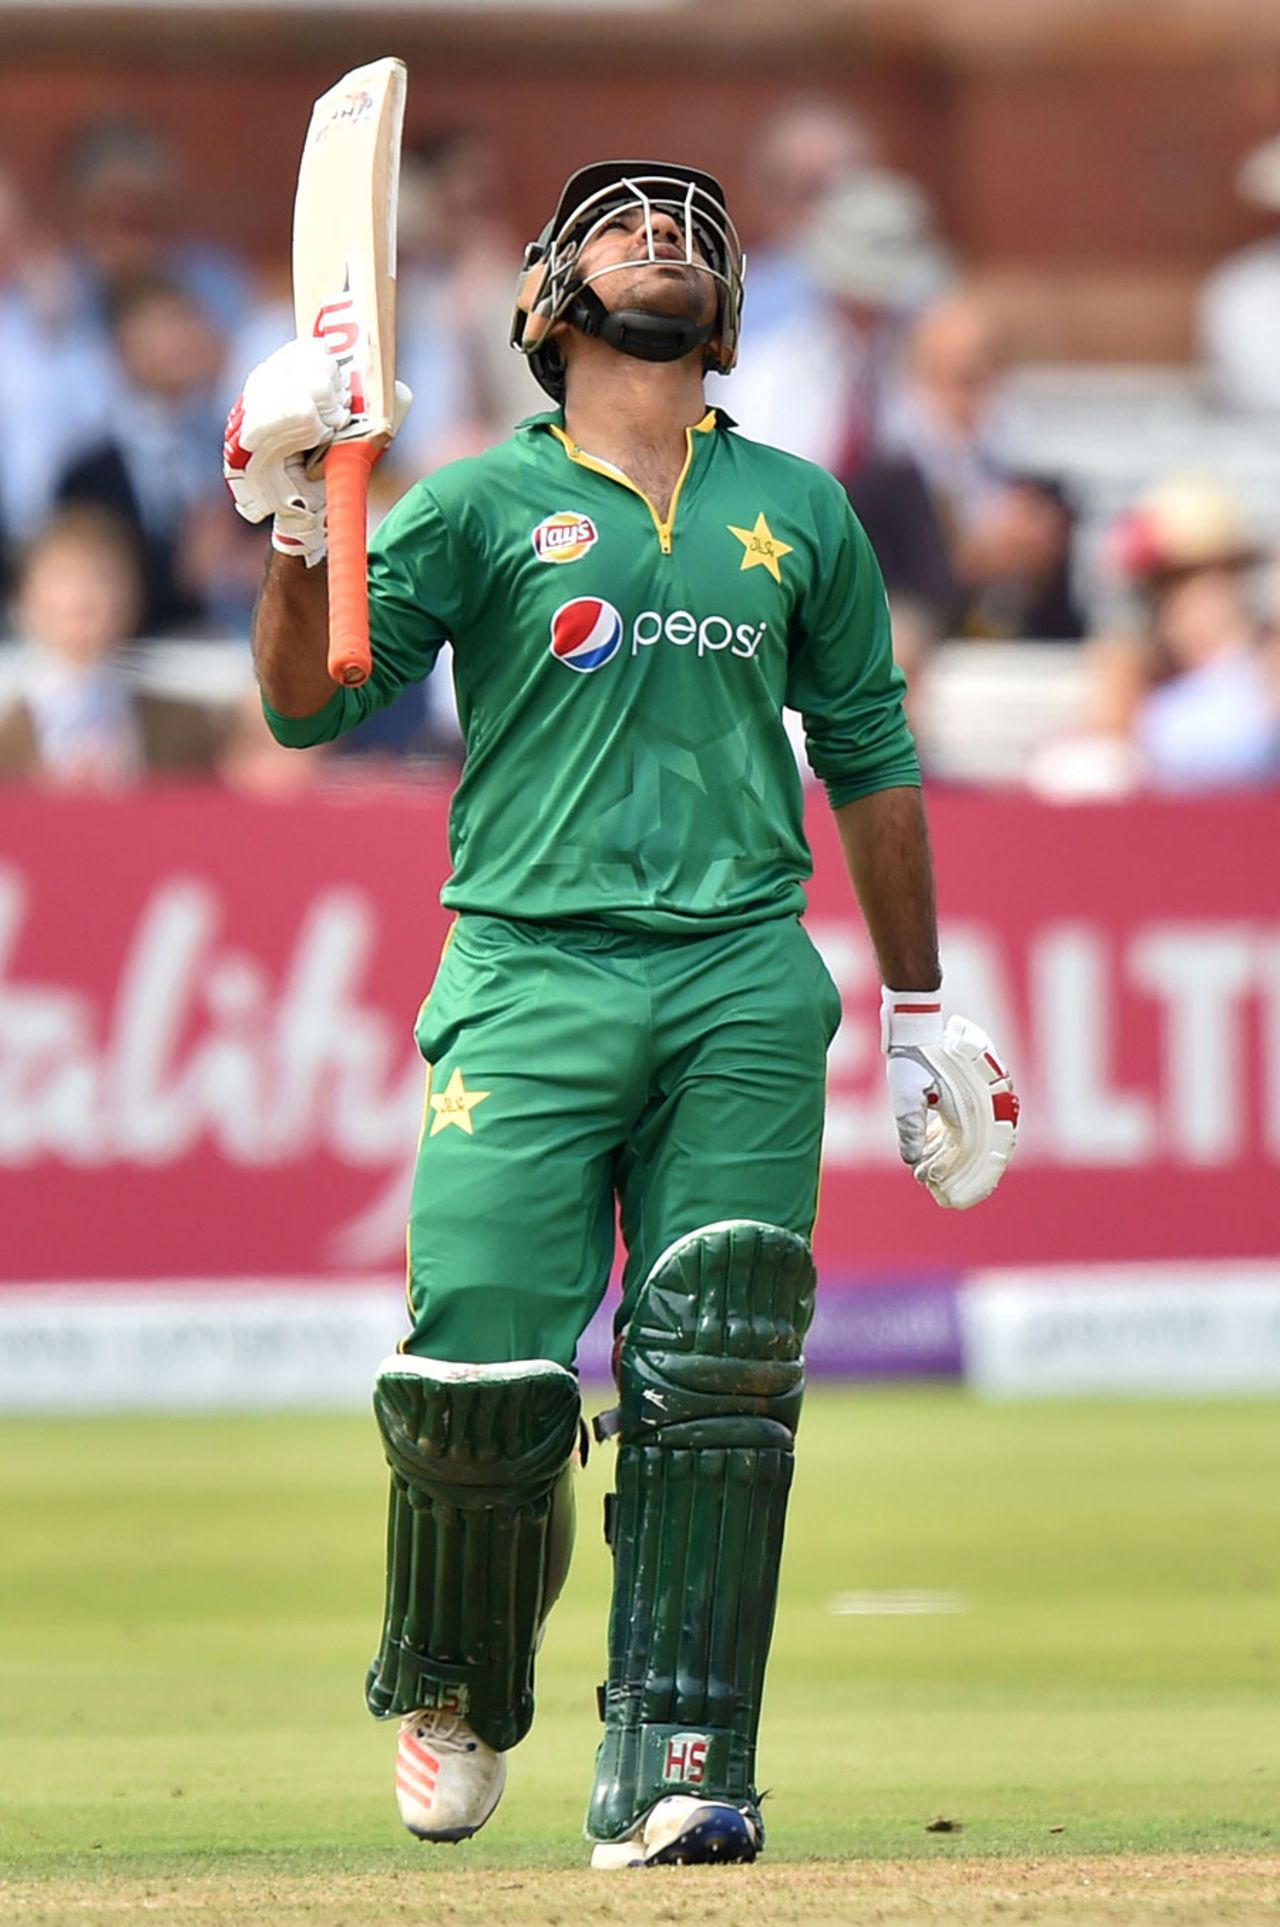 Sarfraz Ahmed made his second fifty of the series, England v Pakistan, 2nd ODI, Lord's, August 27, 2016